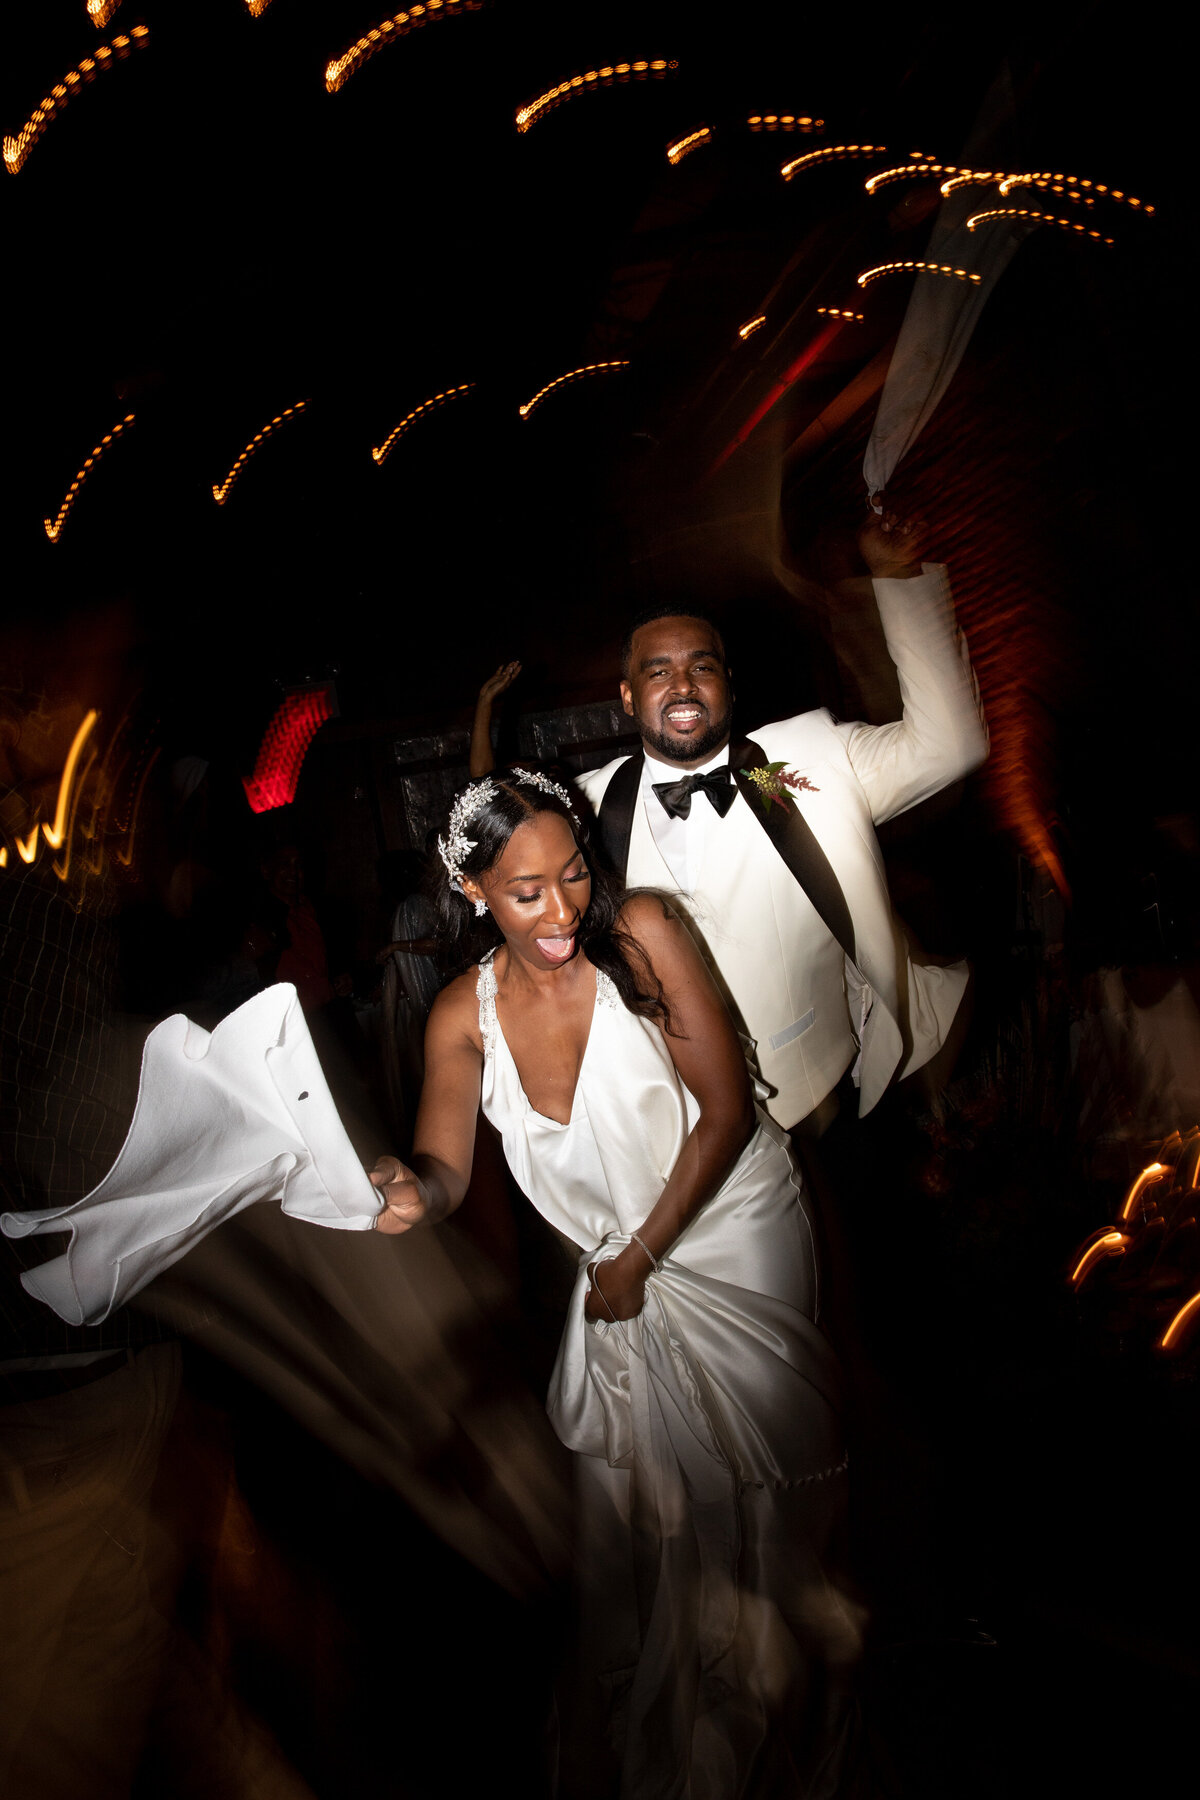 A bride and groom dancing at their reception.